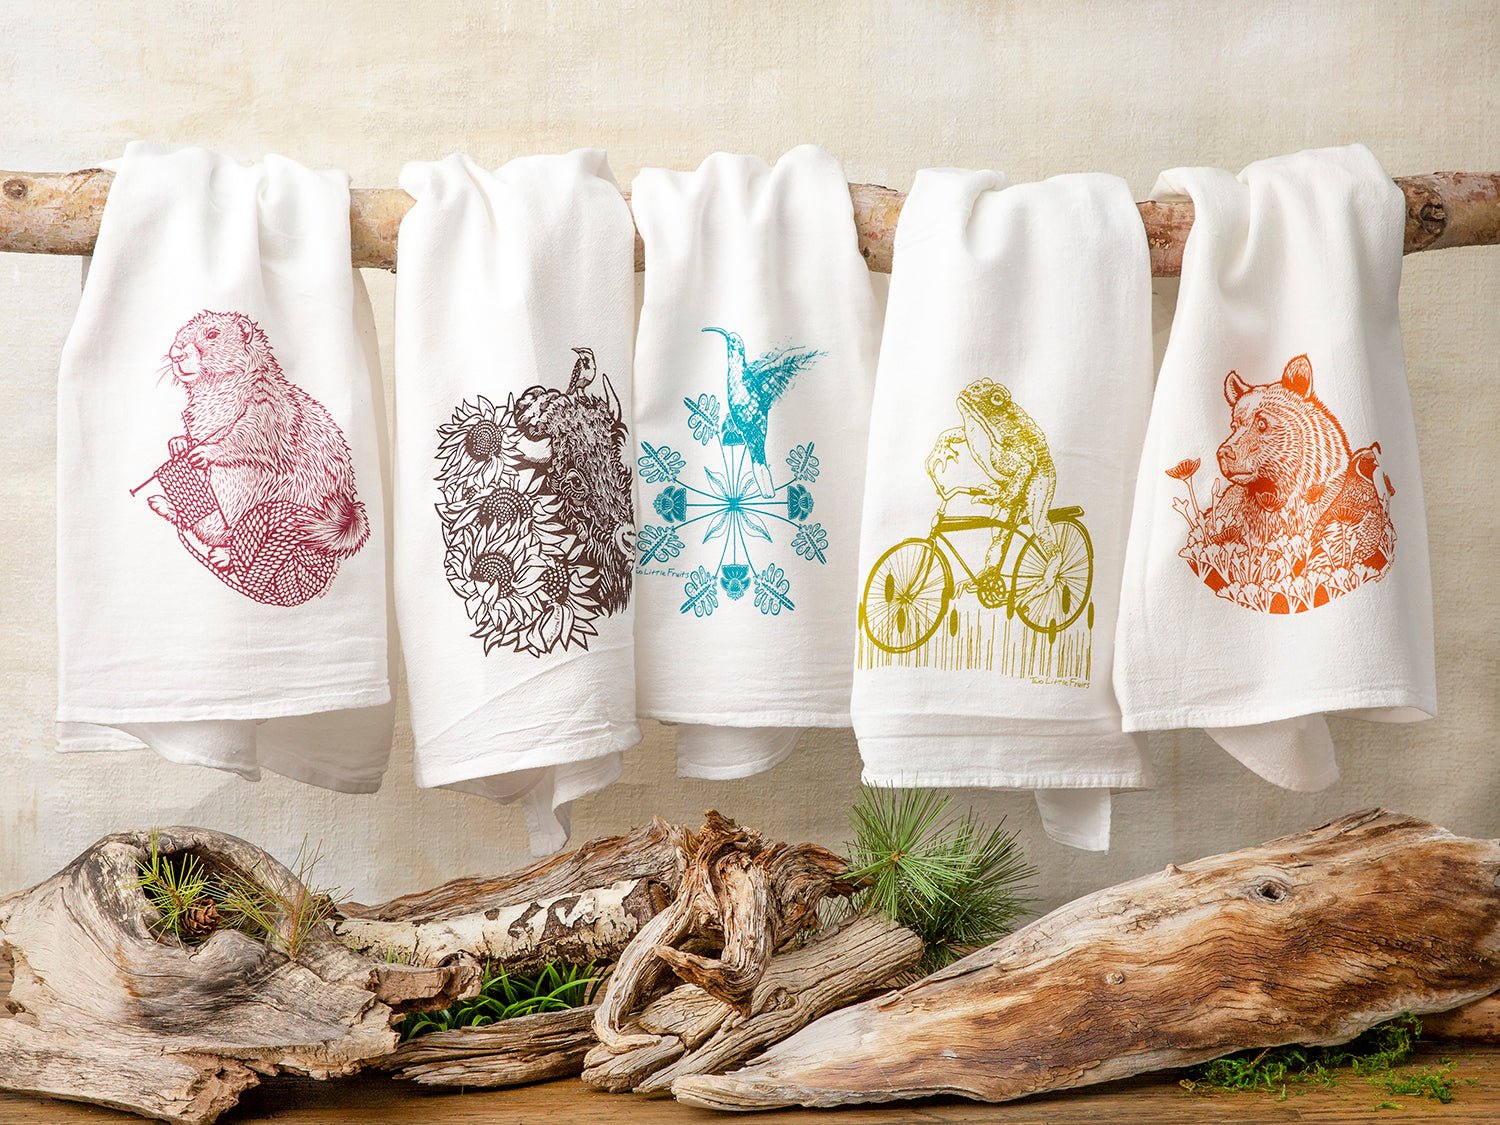 Bee and Hummingbird Kitchen Towel Set - Two Little Fruits